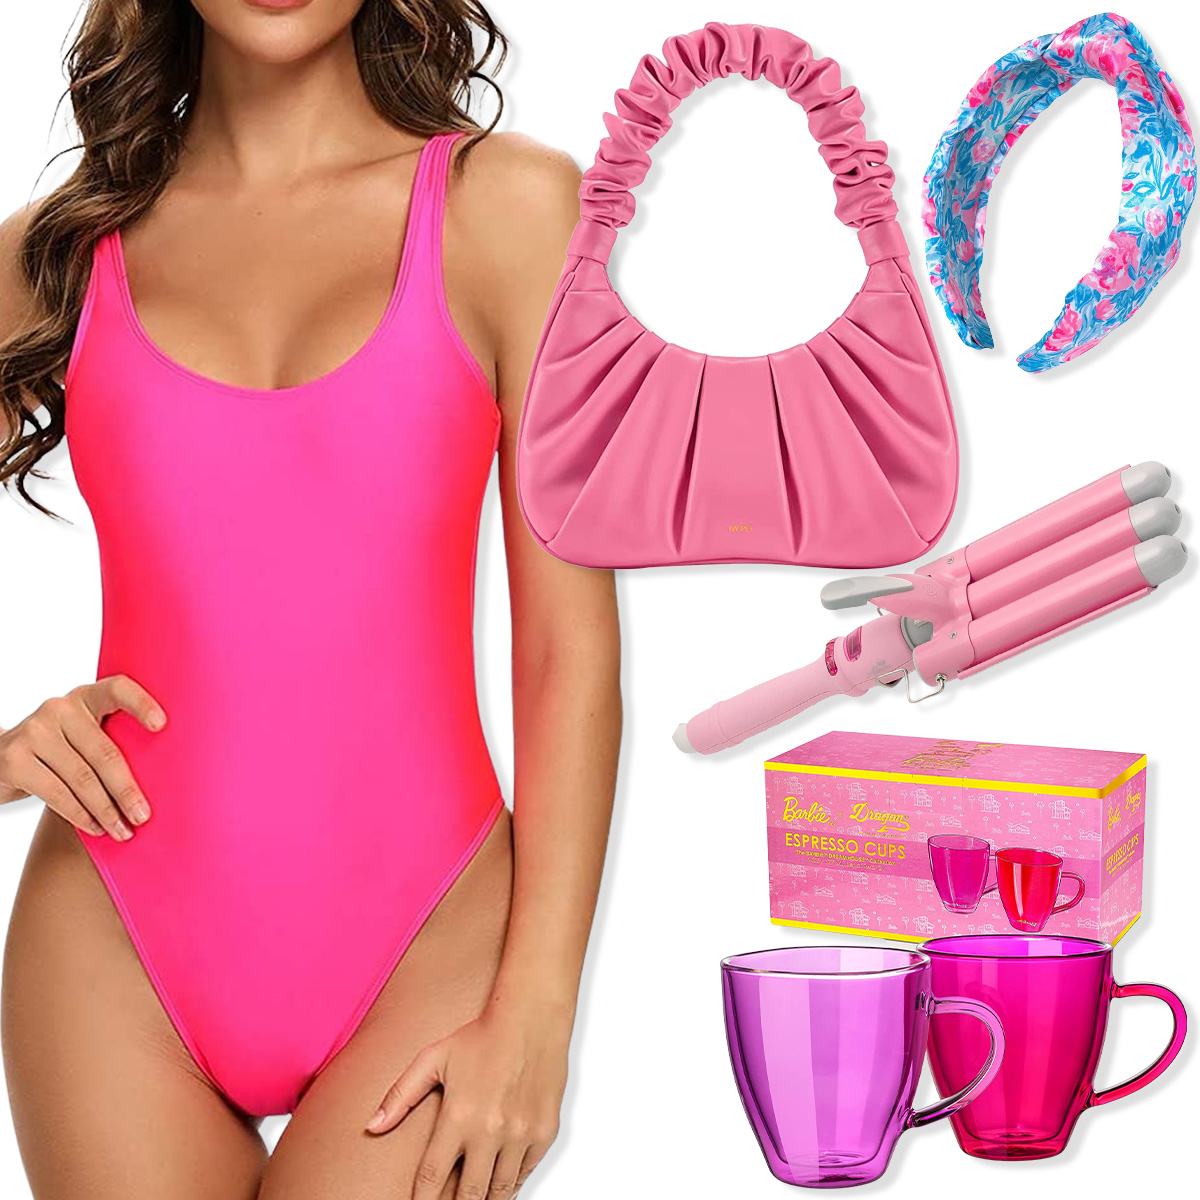 PINK - Victoria's Secret Ultimate Push Up Sports Bra HOT Pink Barbie Cage  Front XS - $25 - From Margo